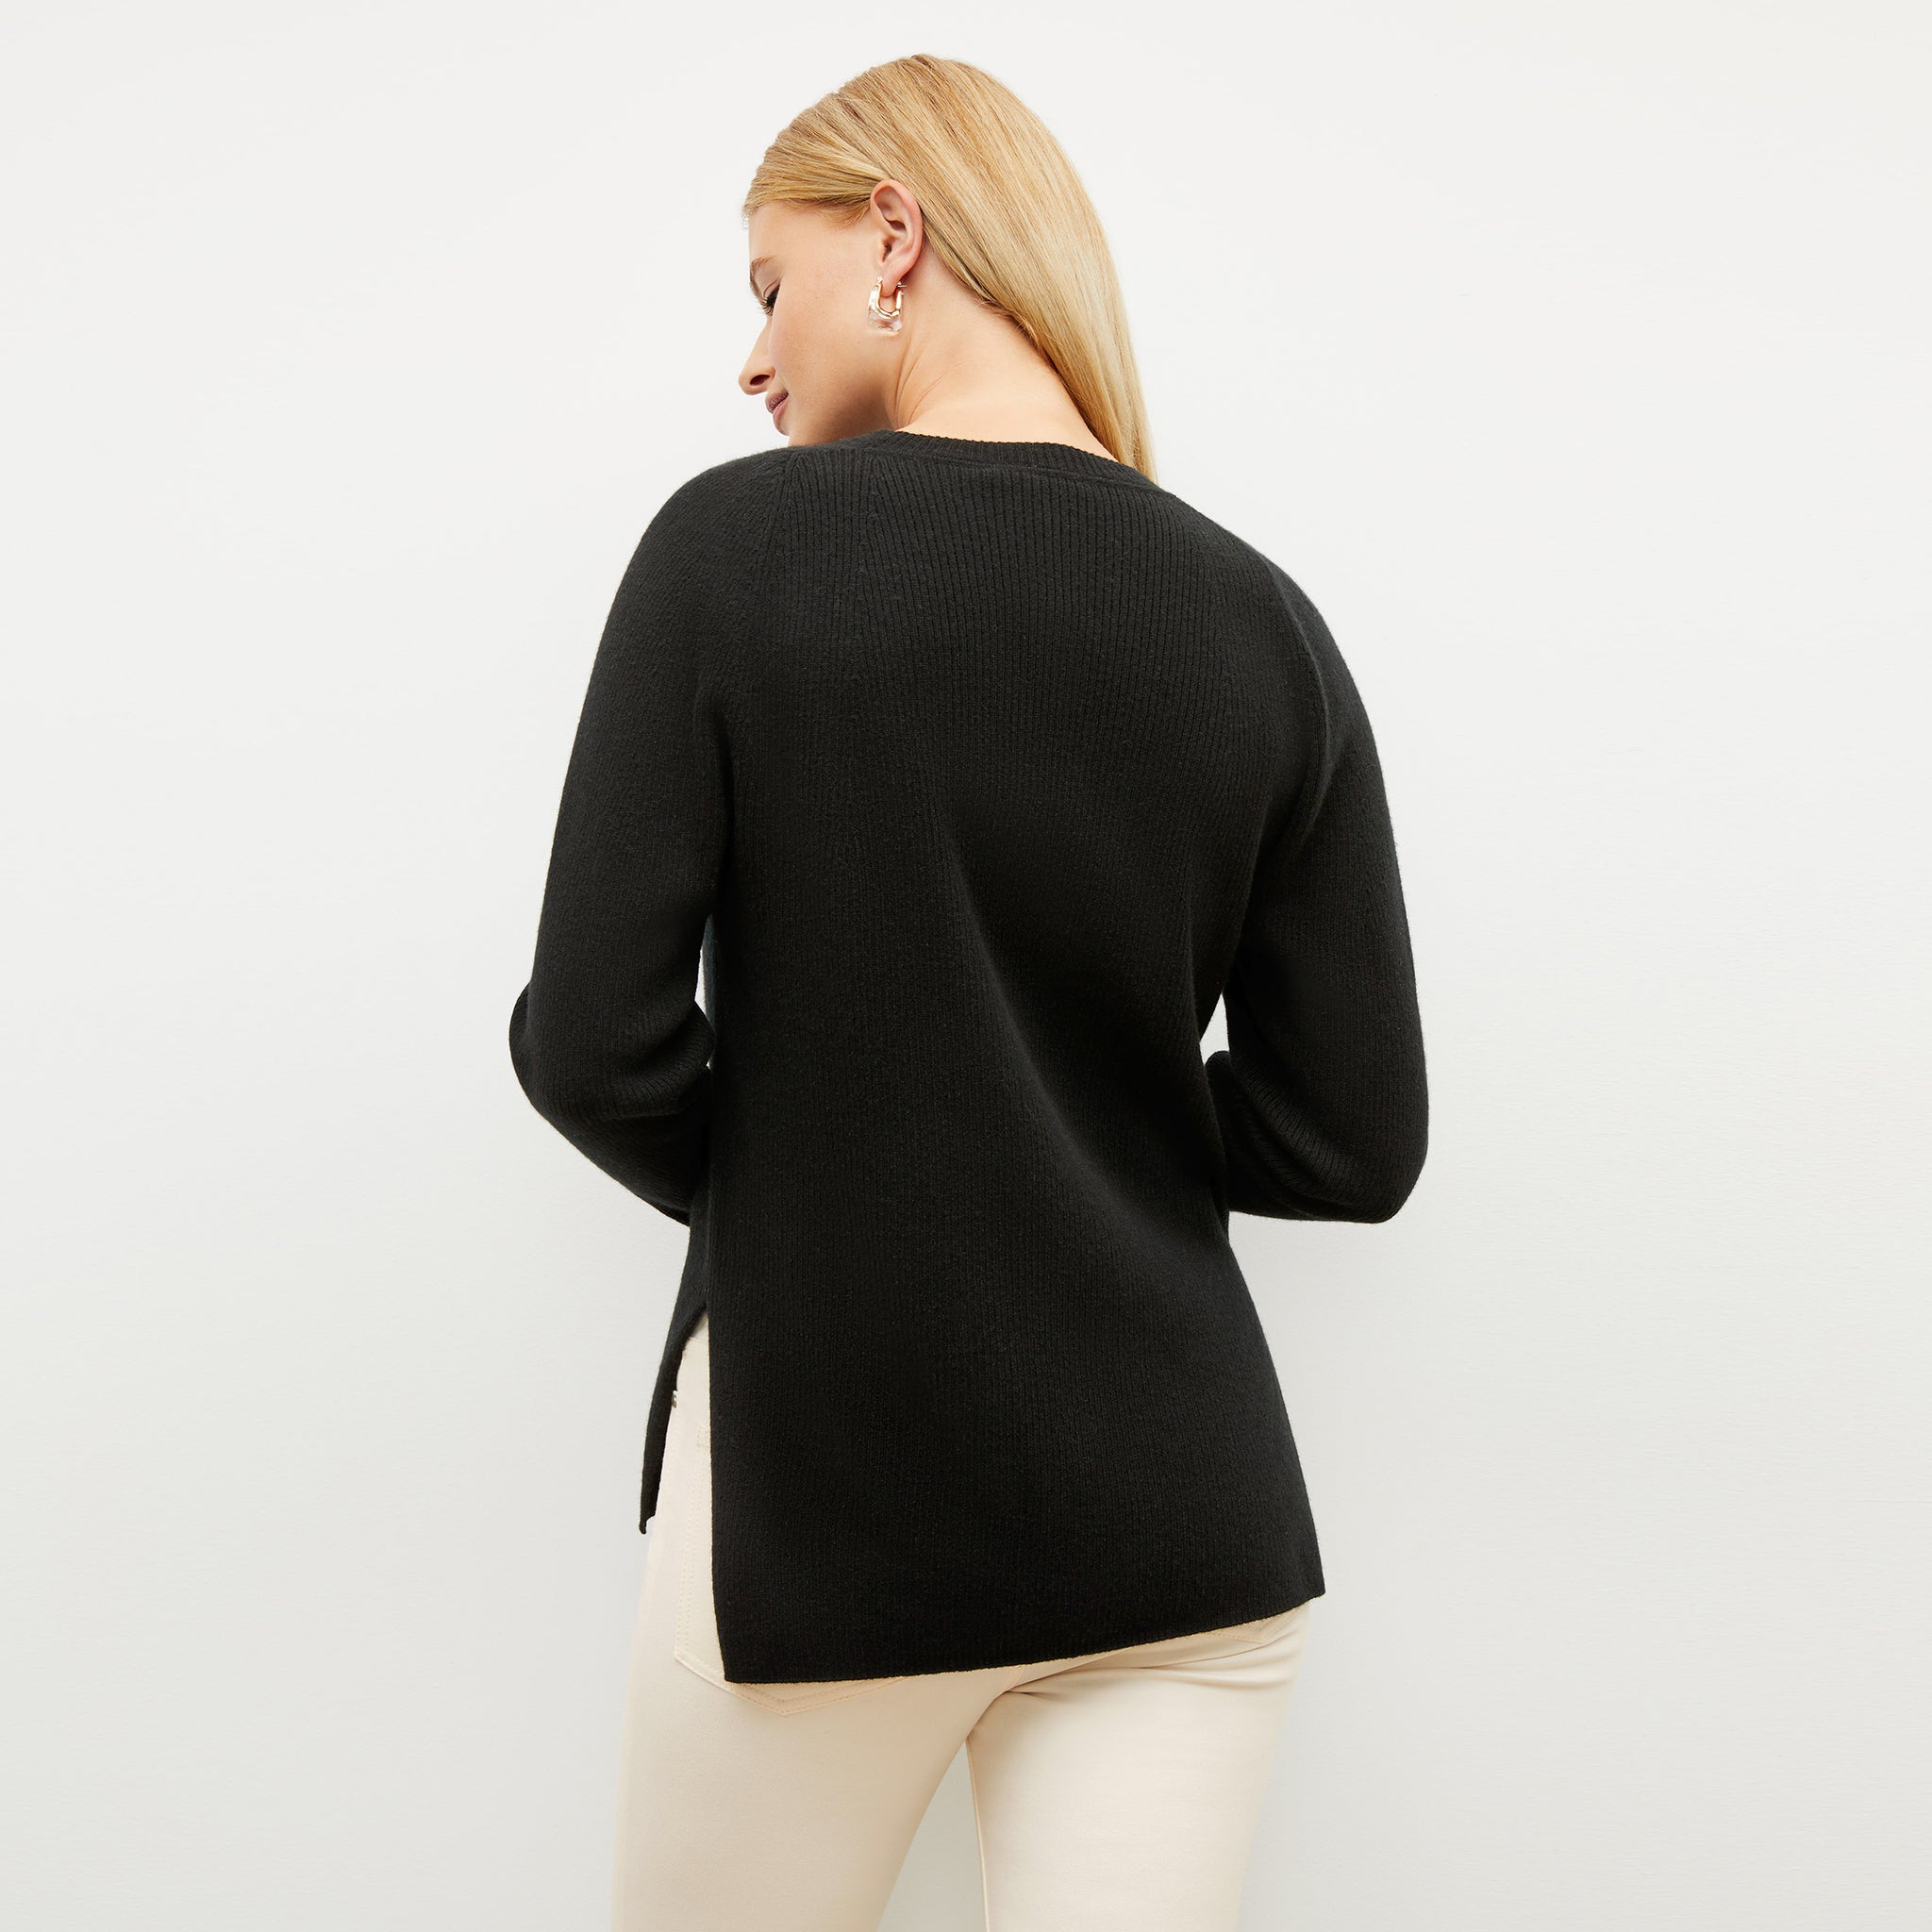 Black image of a woman wearing the ollie sweater in black